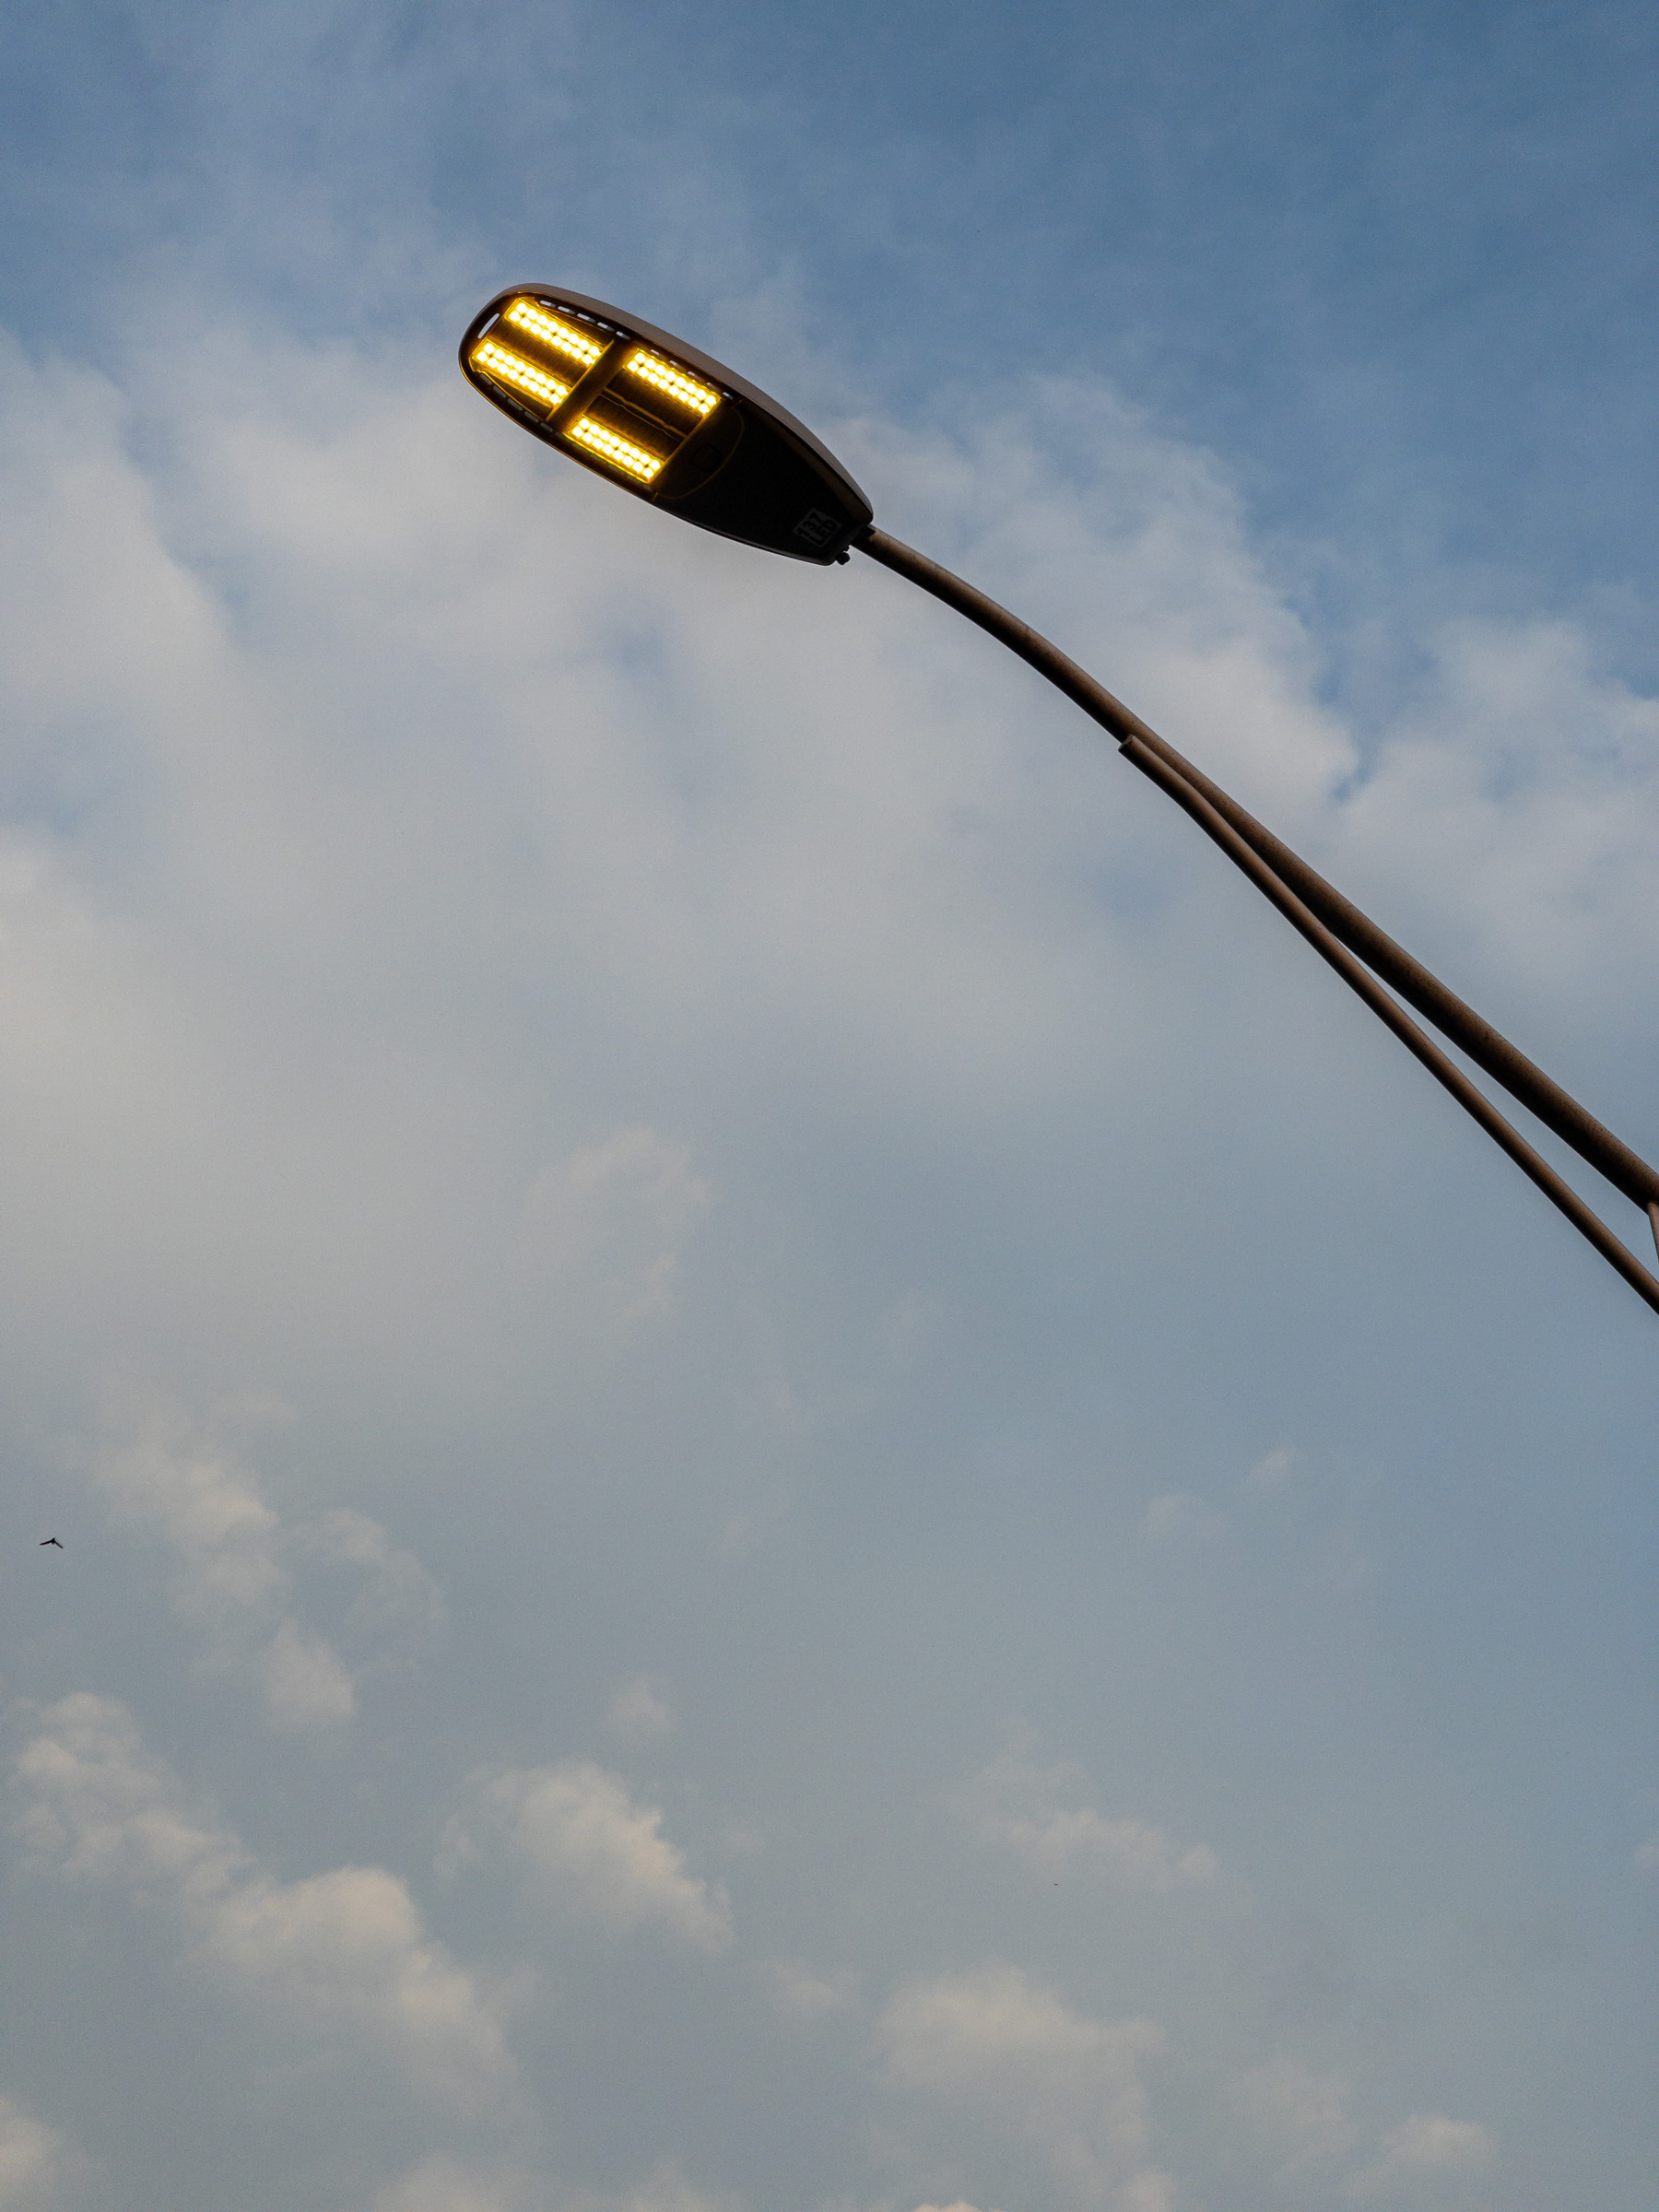 Streetlight against blue sky and clouds. Street light cuts across upper right corner of frame and is lit.